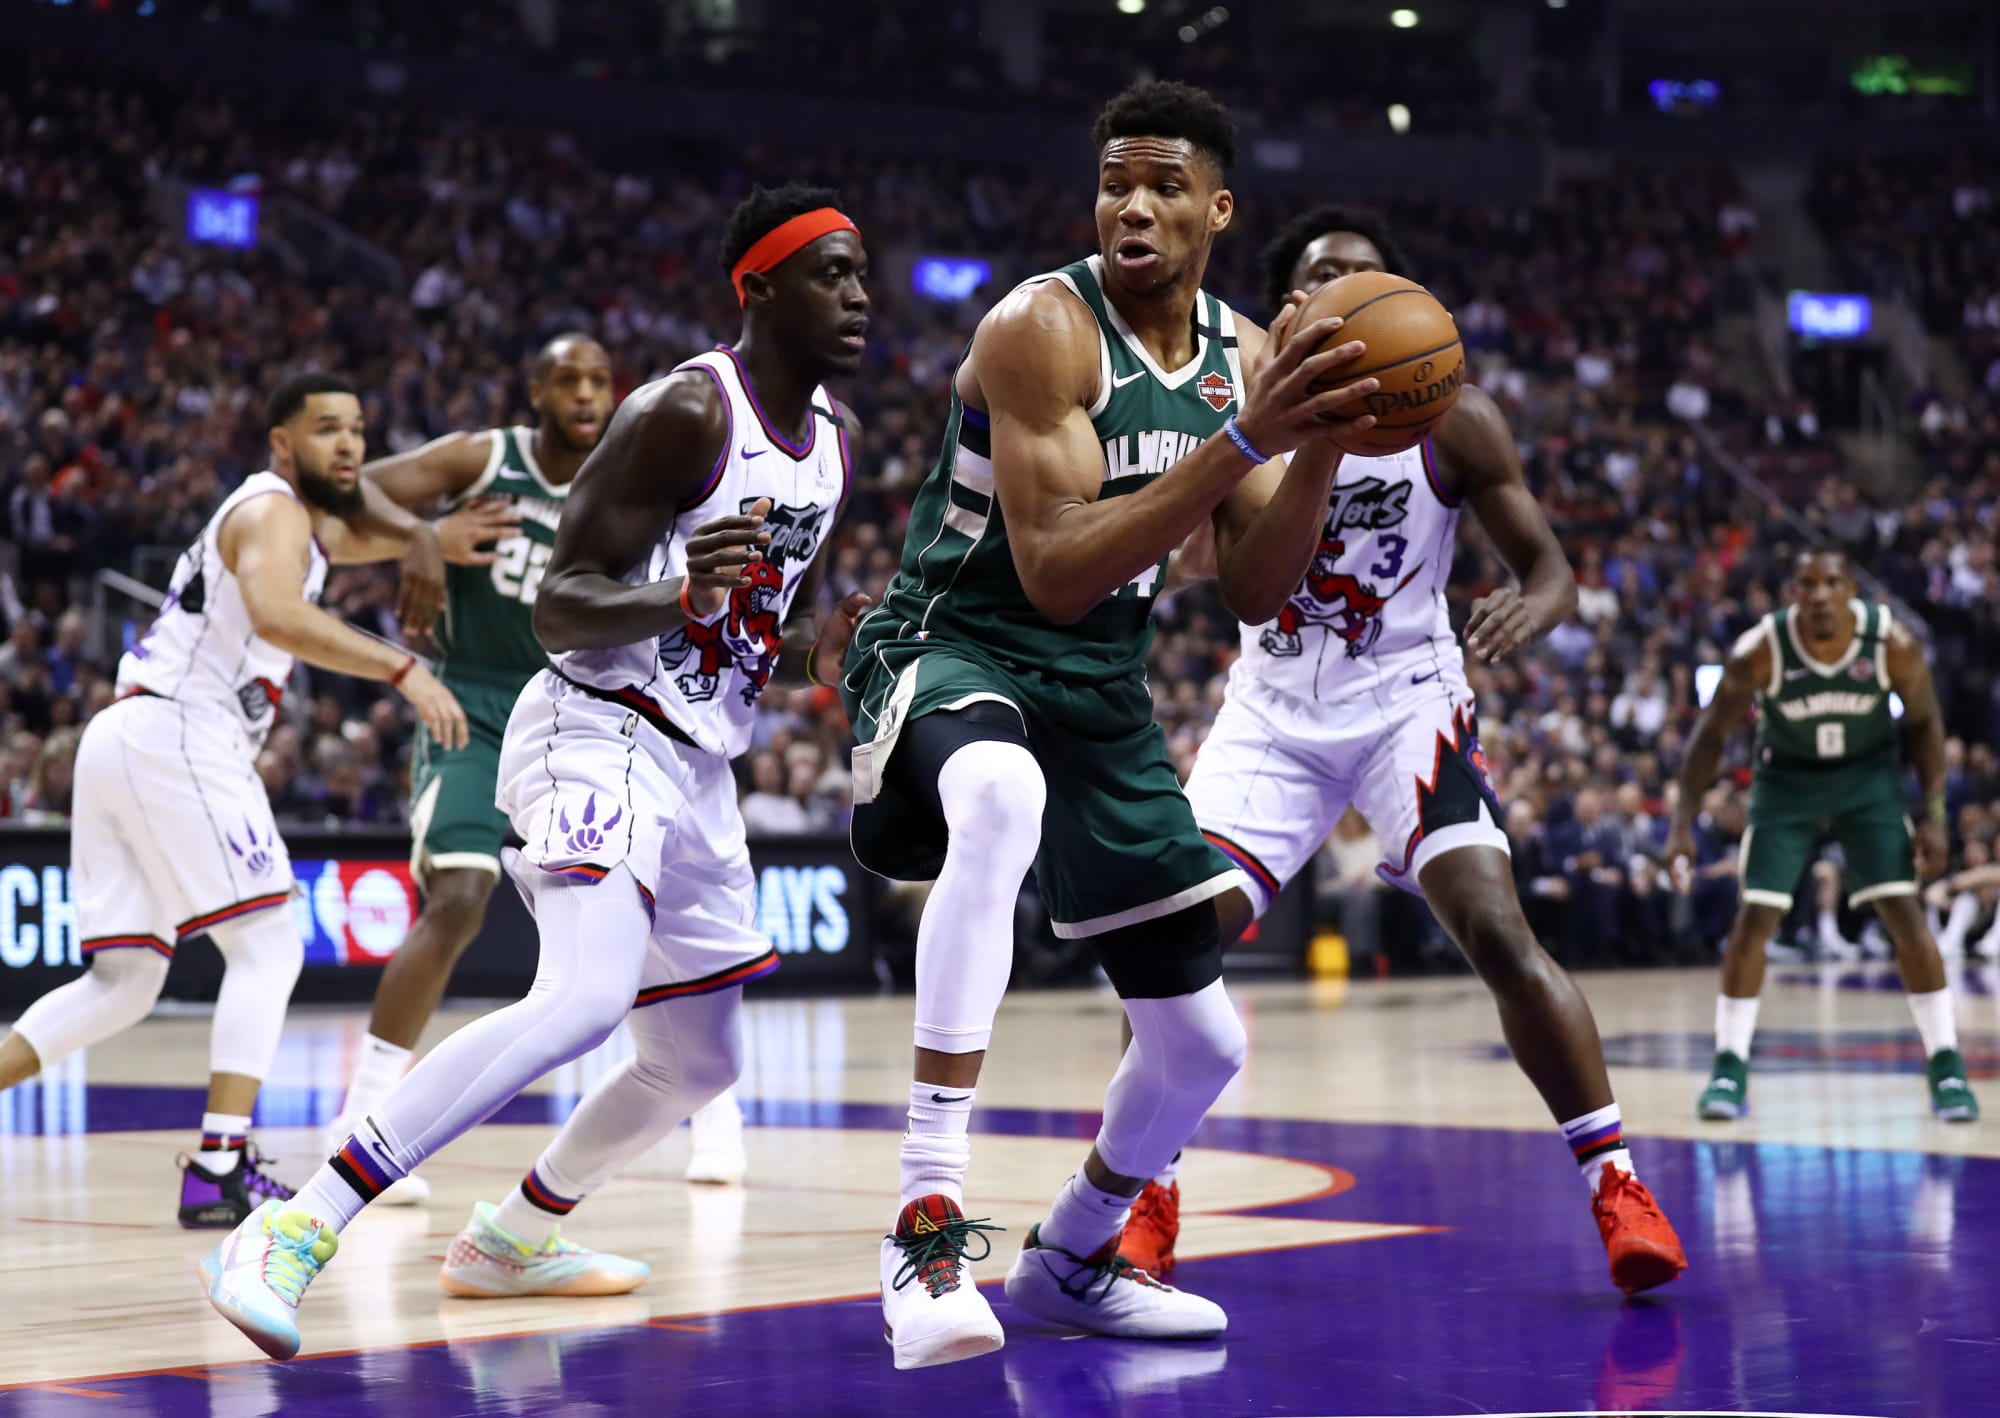 Giannis Antetokounmpo looking to stay one step ahead of opponents